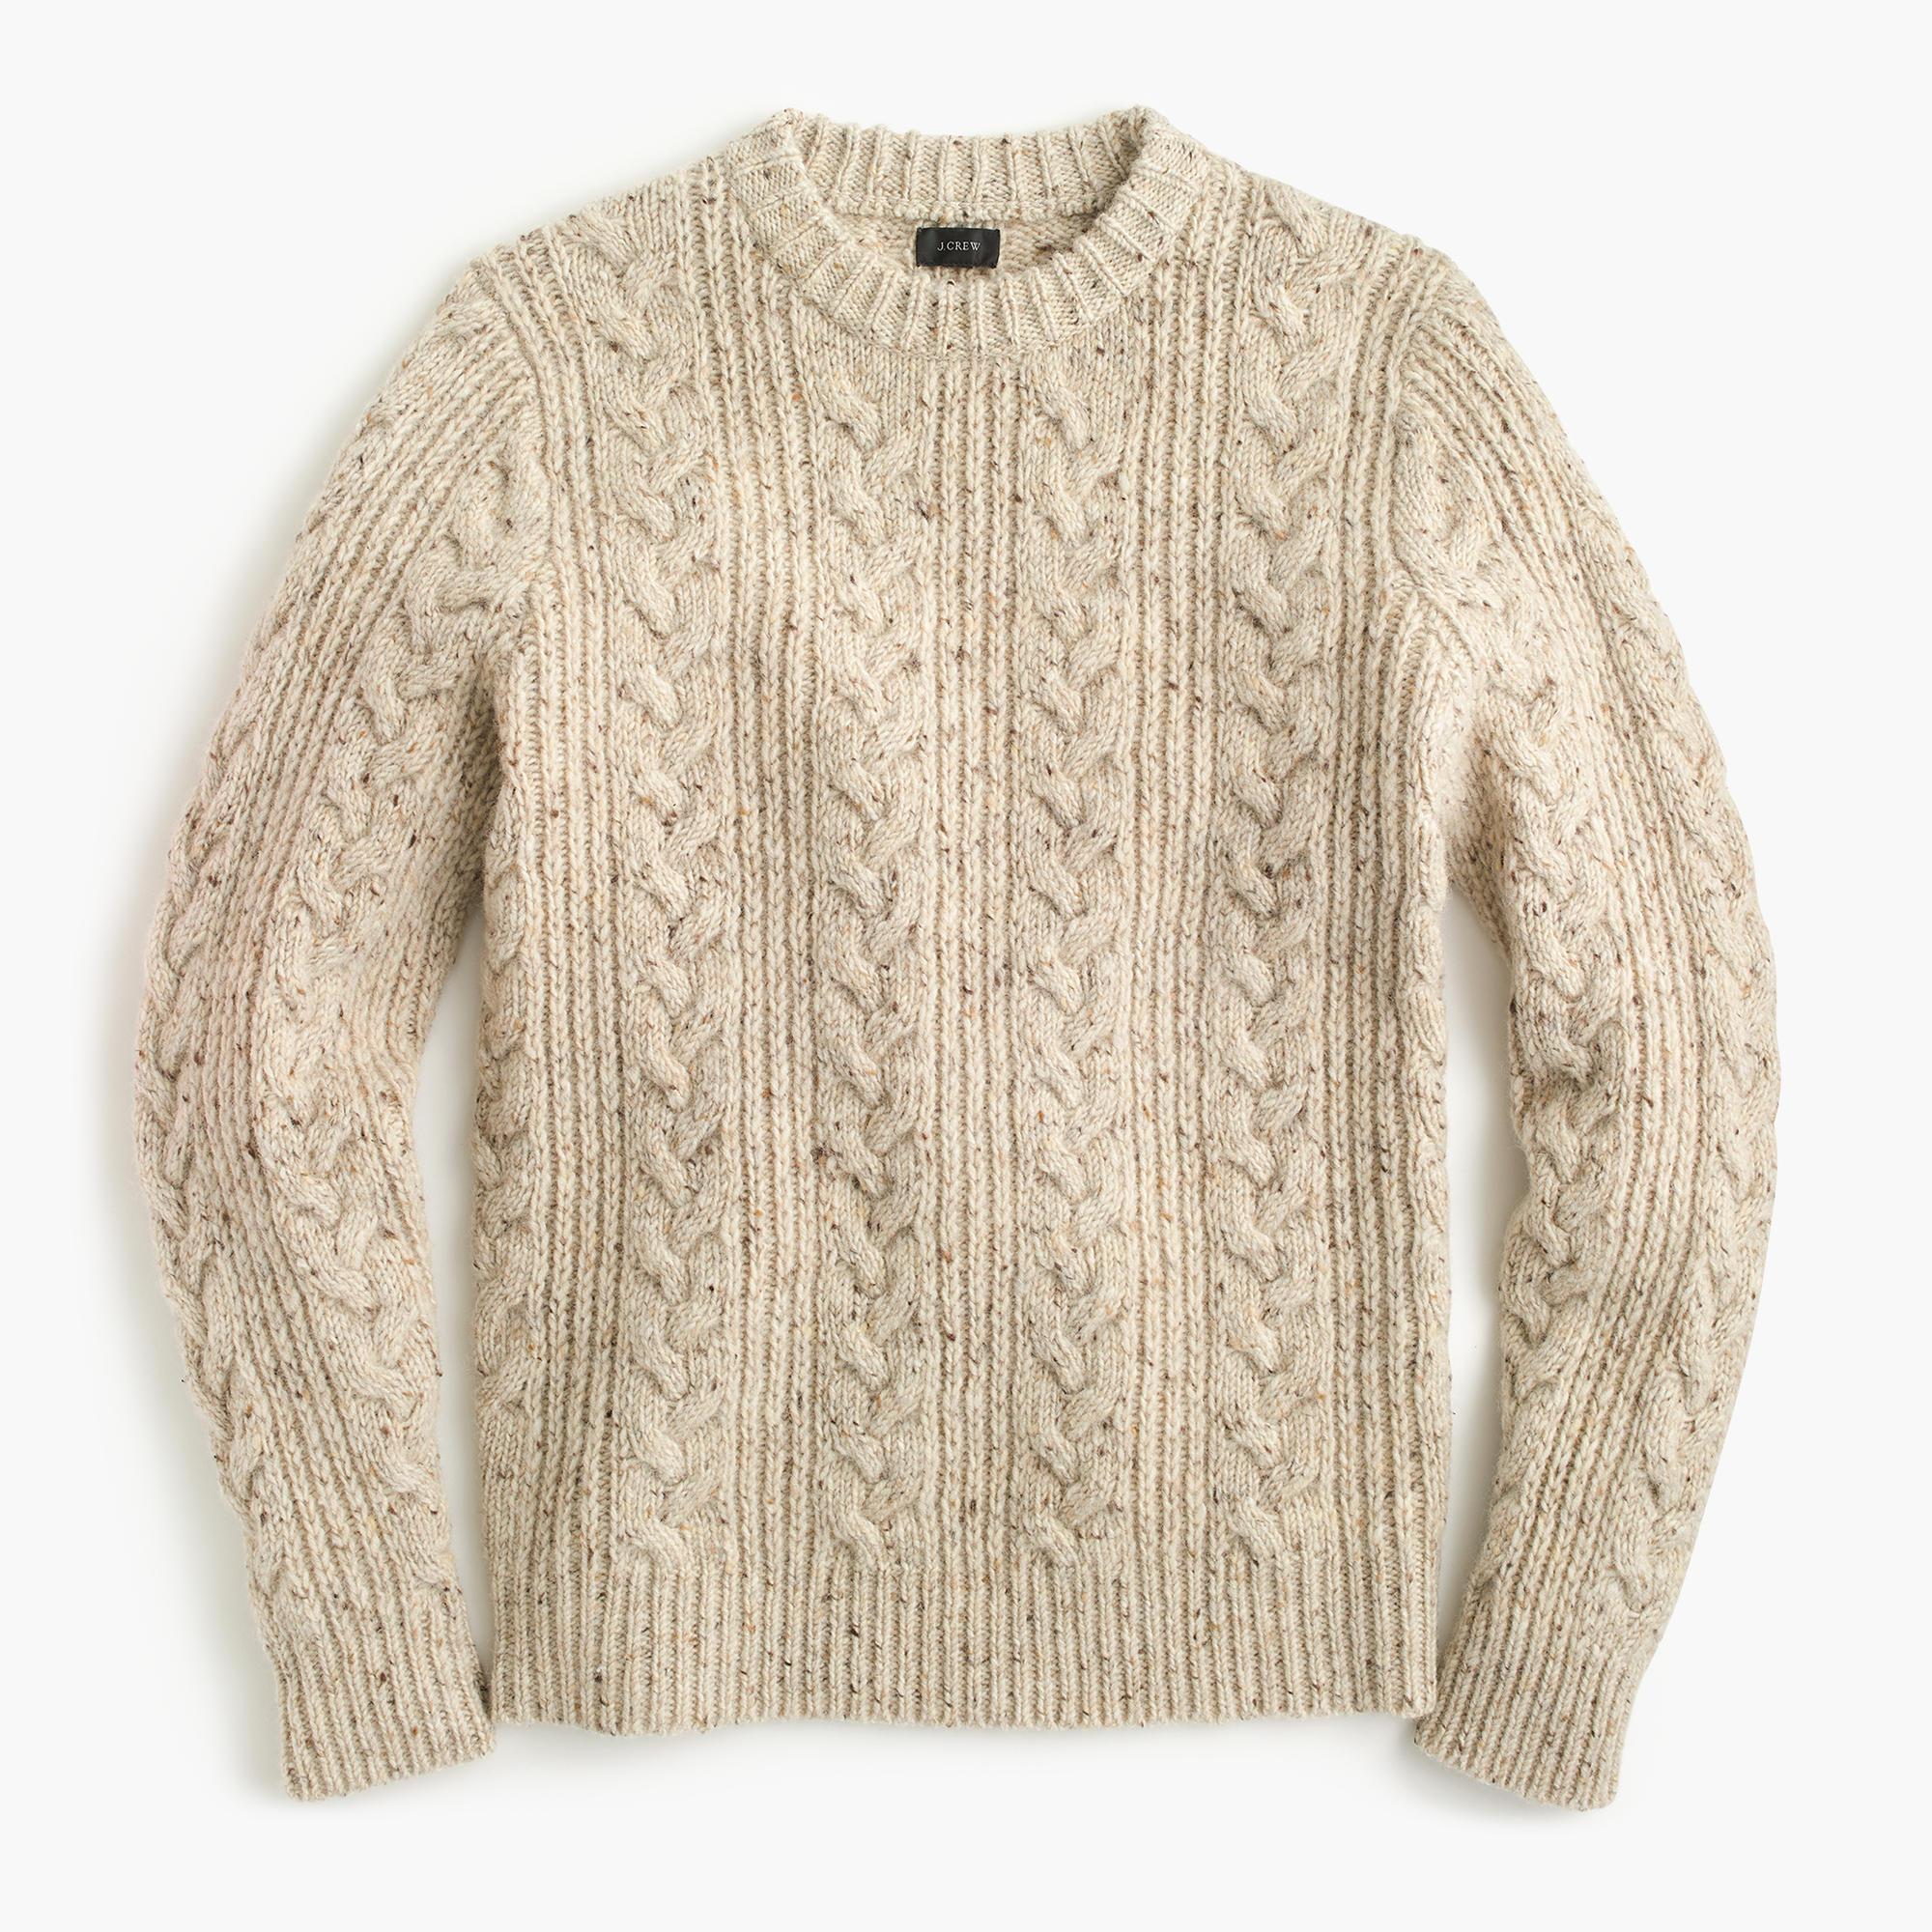 J.Crew Crewneck Sweater In Donegal Wool in Natural for Men - Lyst